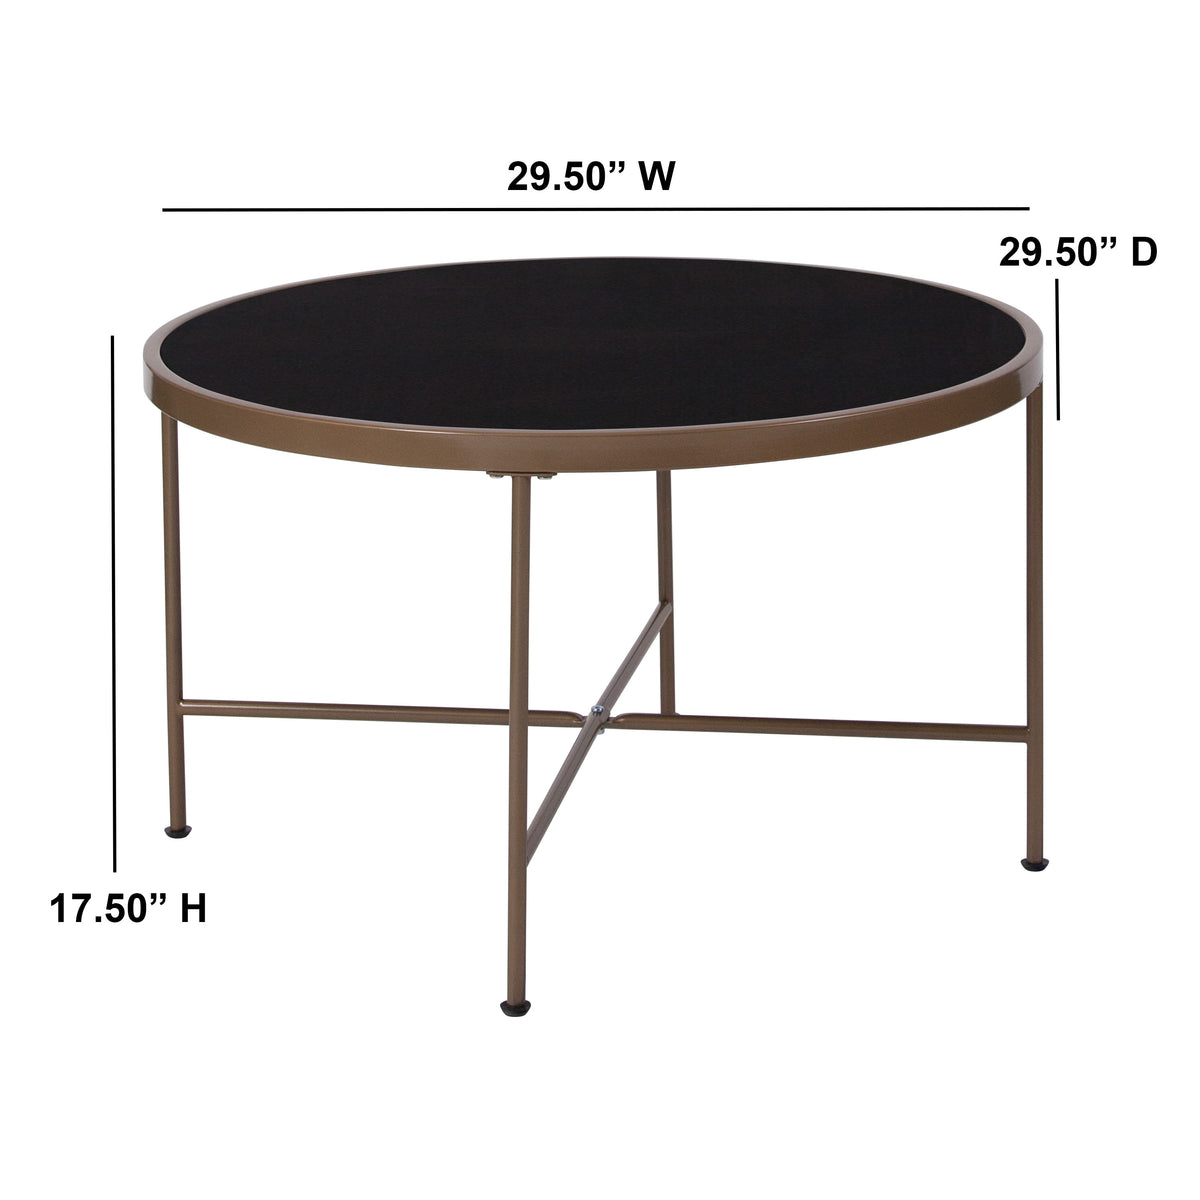 Black Tempered Glass Coffee Table with Matte Gold Frame - Accent Table